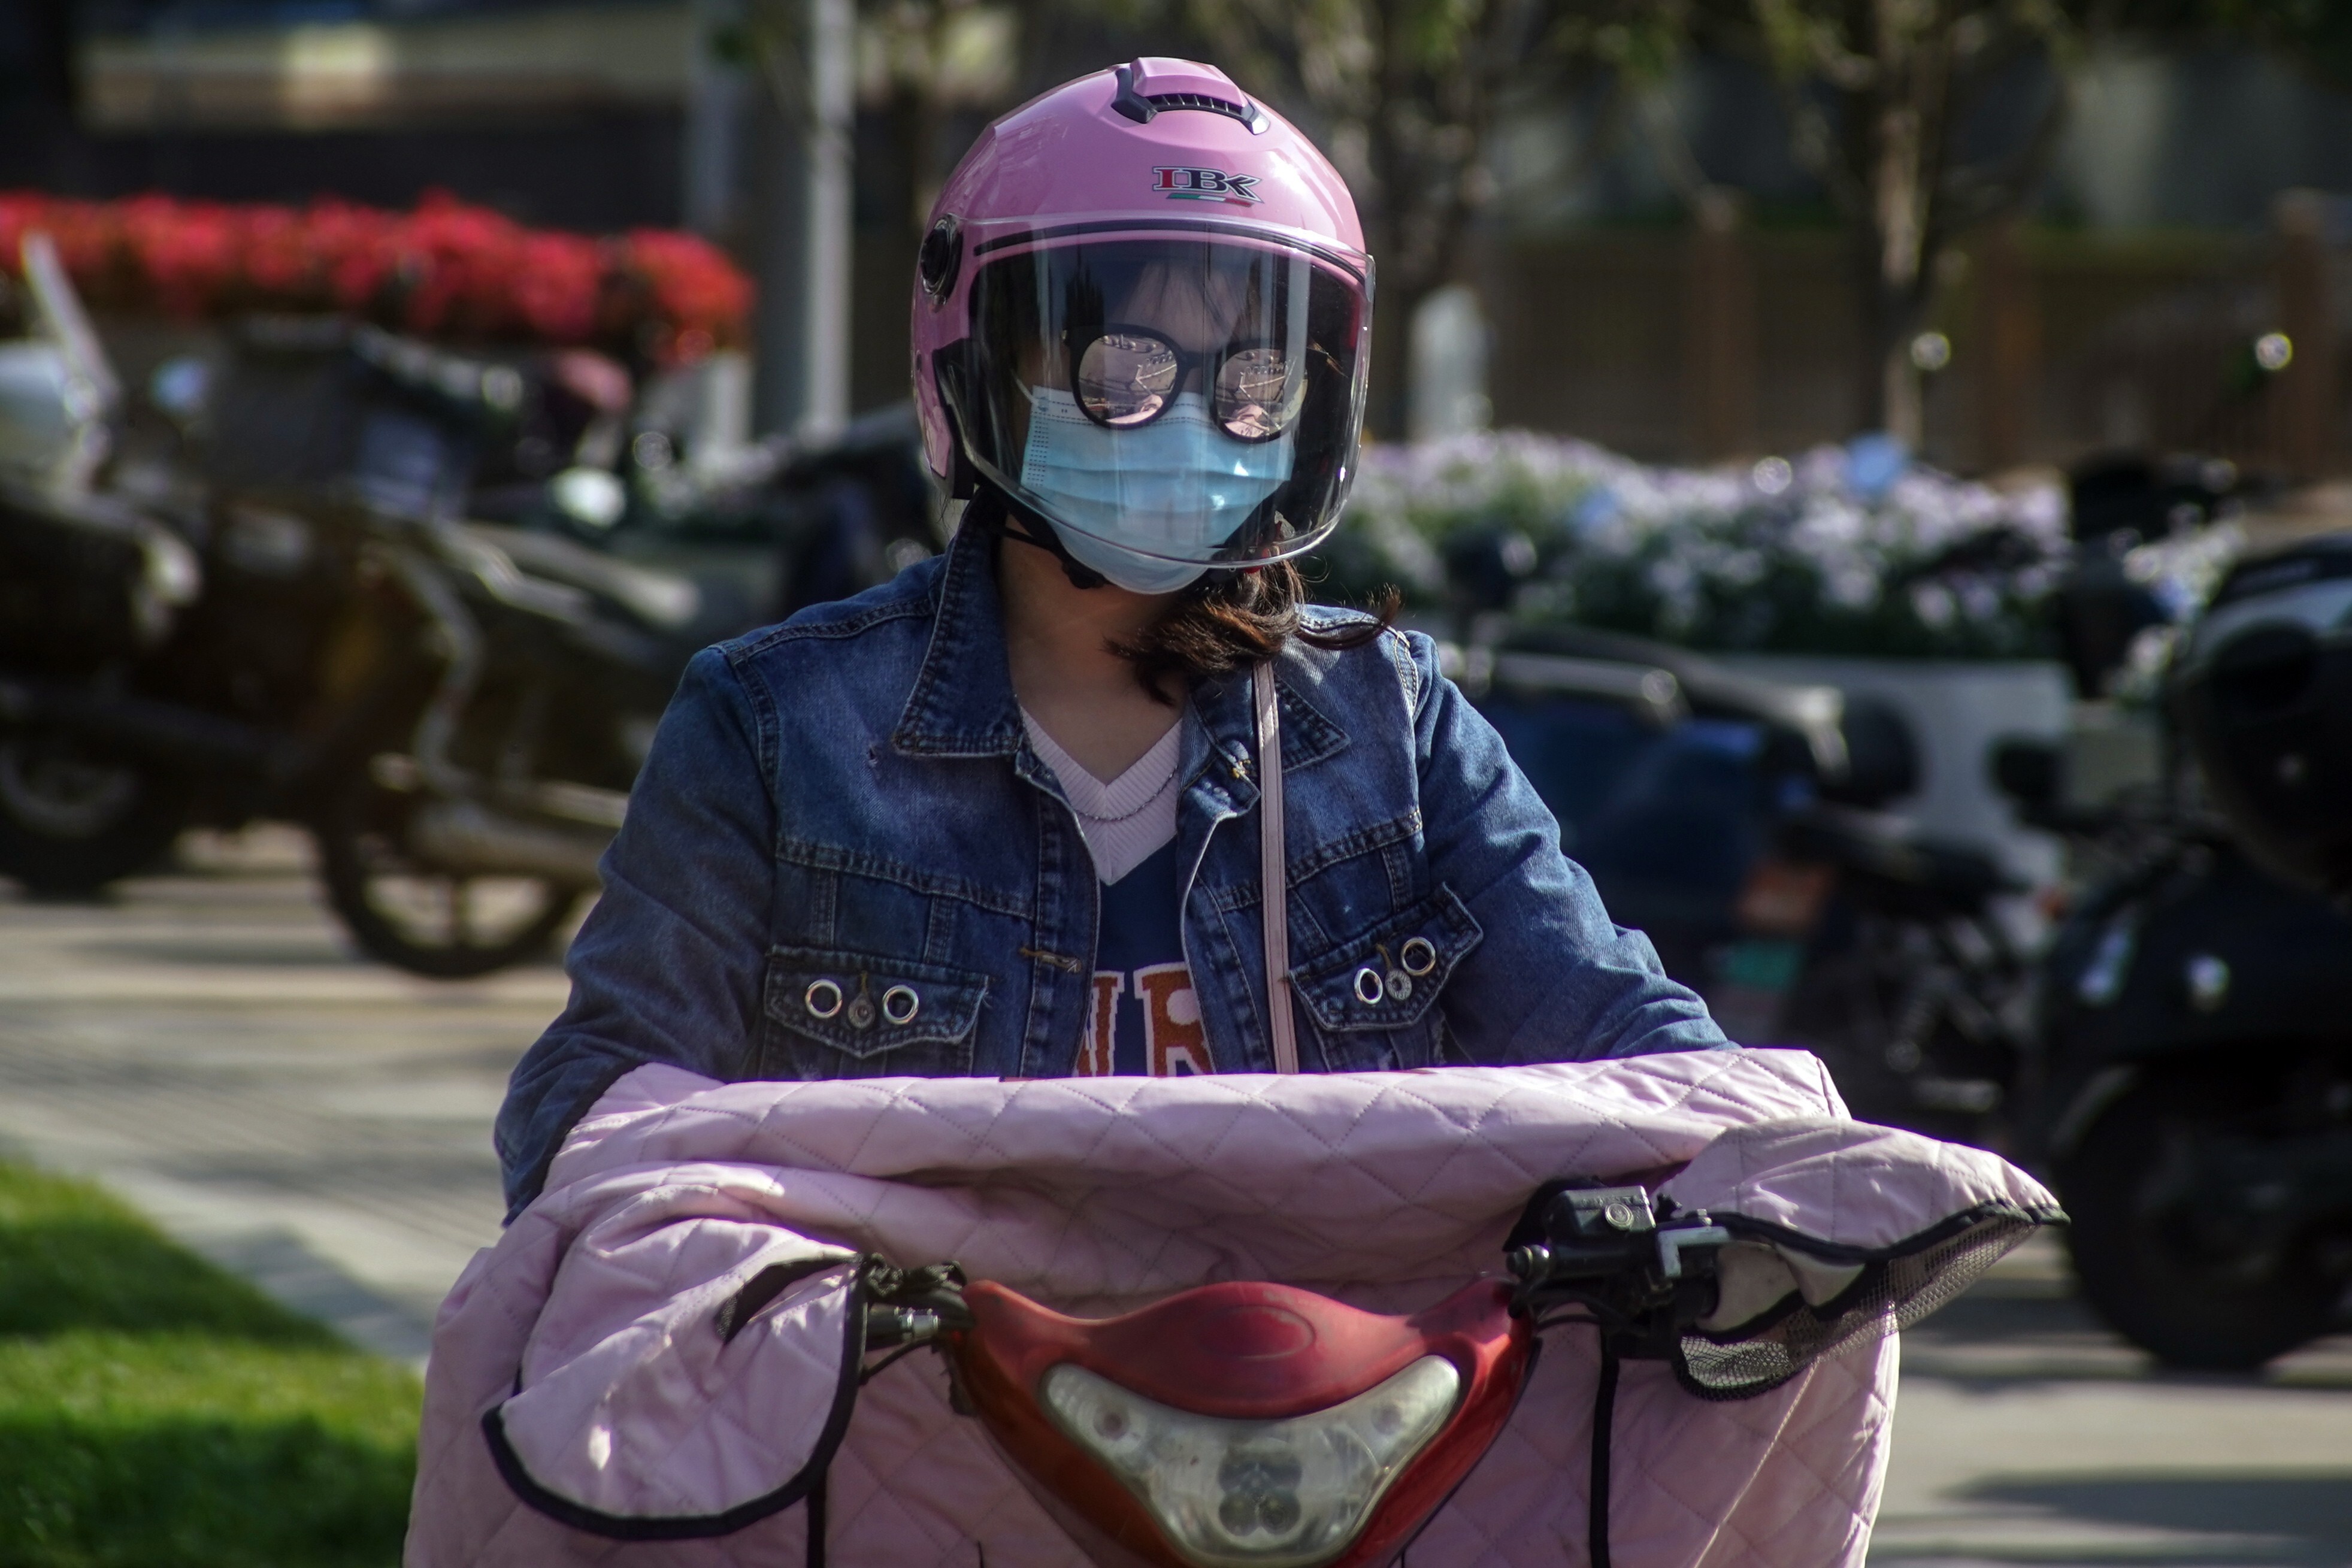 Helmets will become mandatory for e-scooter riders in China from June 1. Photo: EPA